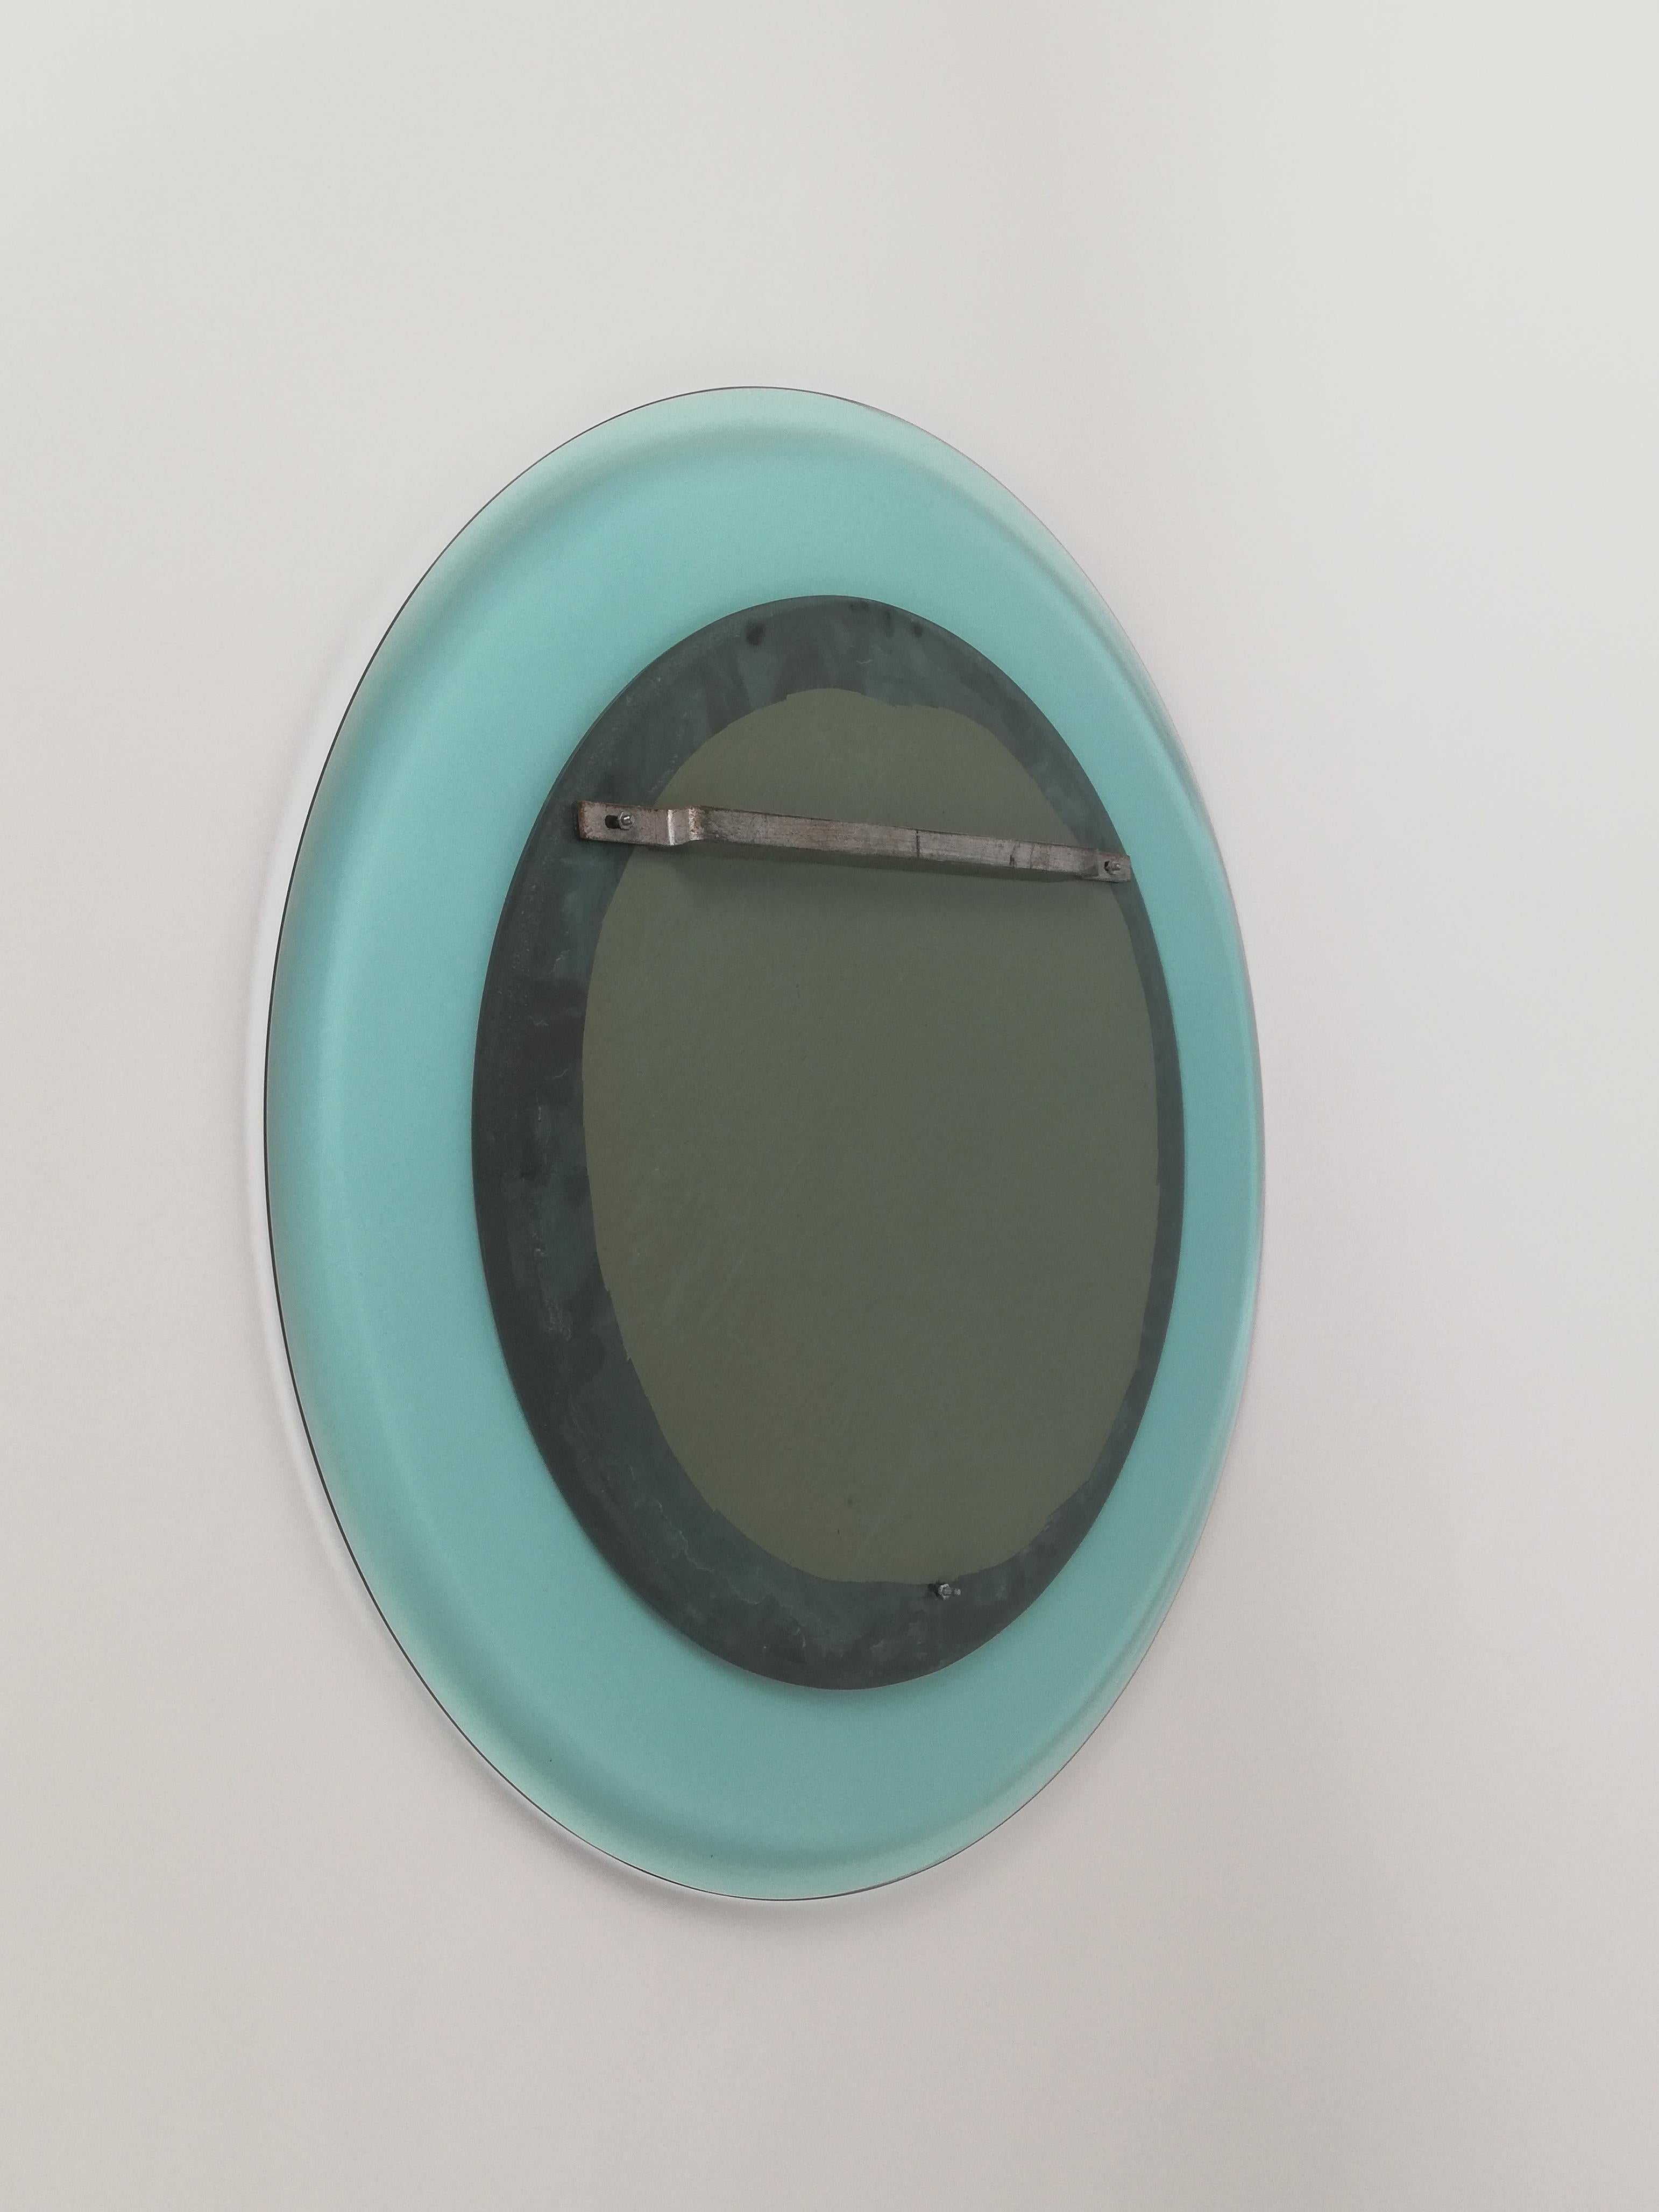 Mid-Century Modern Midcentury Rounded Mirror in Turquois Glass Attributable to Veca, Italy, 1970s For Sale